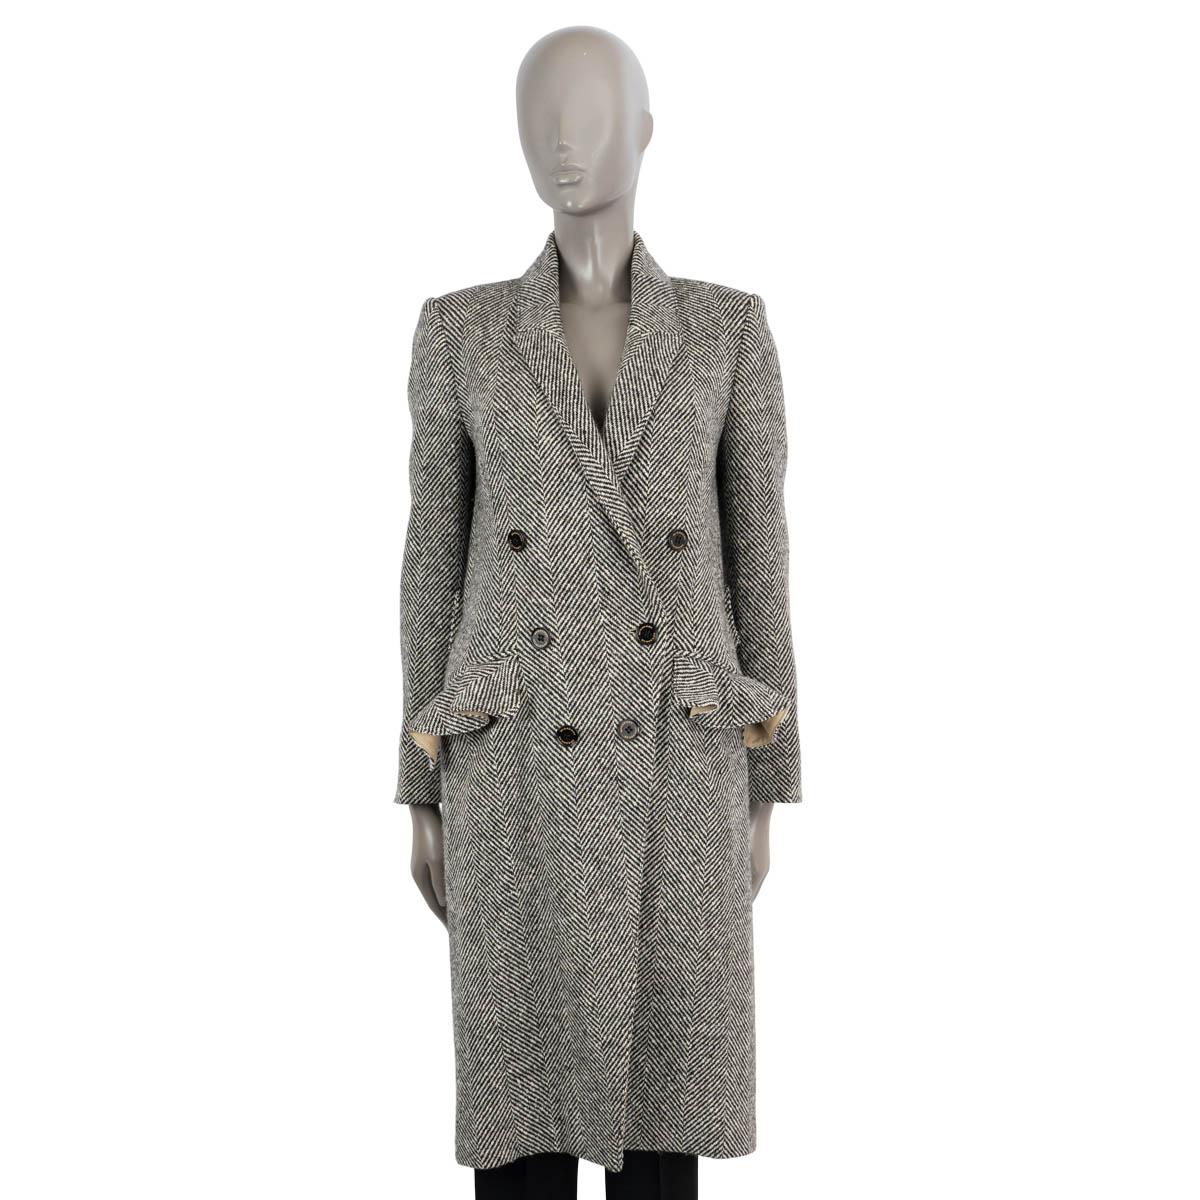 BURBERRY black & white wool DONEGAL HERRINGBONE TWEED Coat Jacket 8 S In Excellent Condition For Sale In Zürich, CH